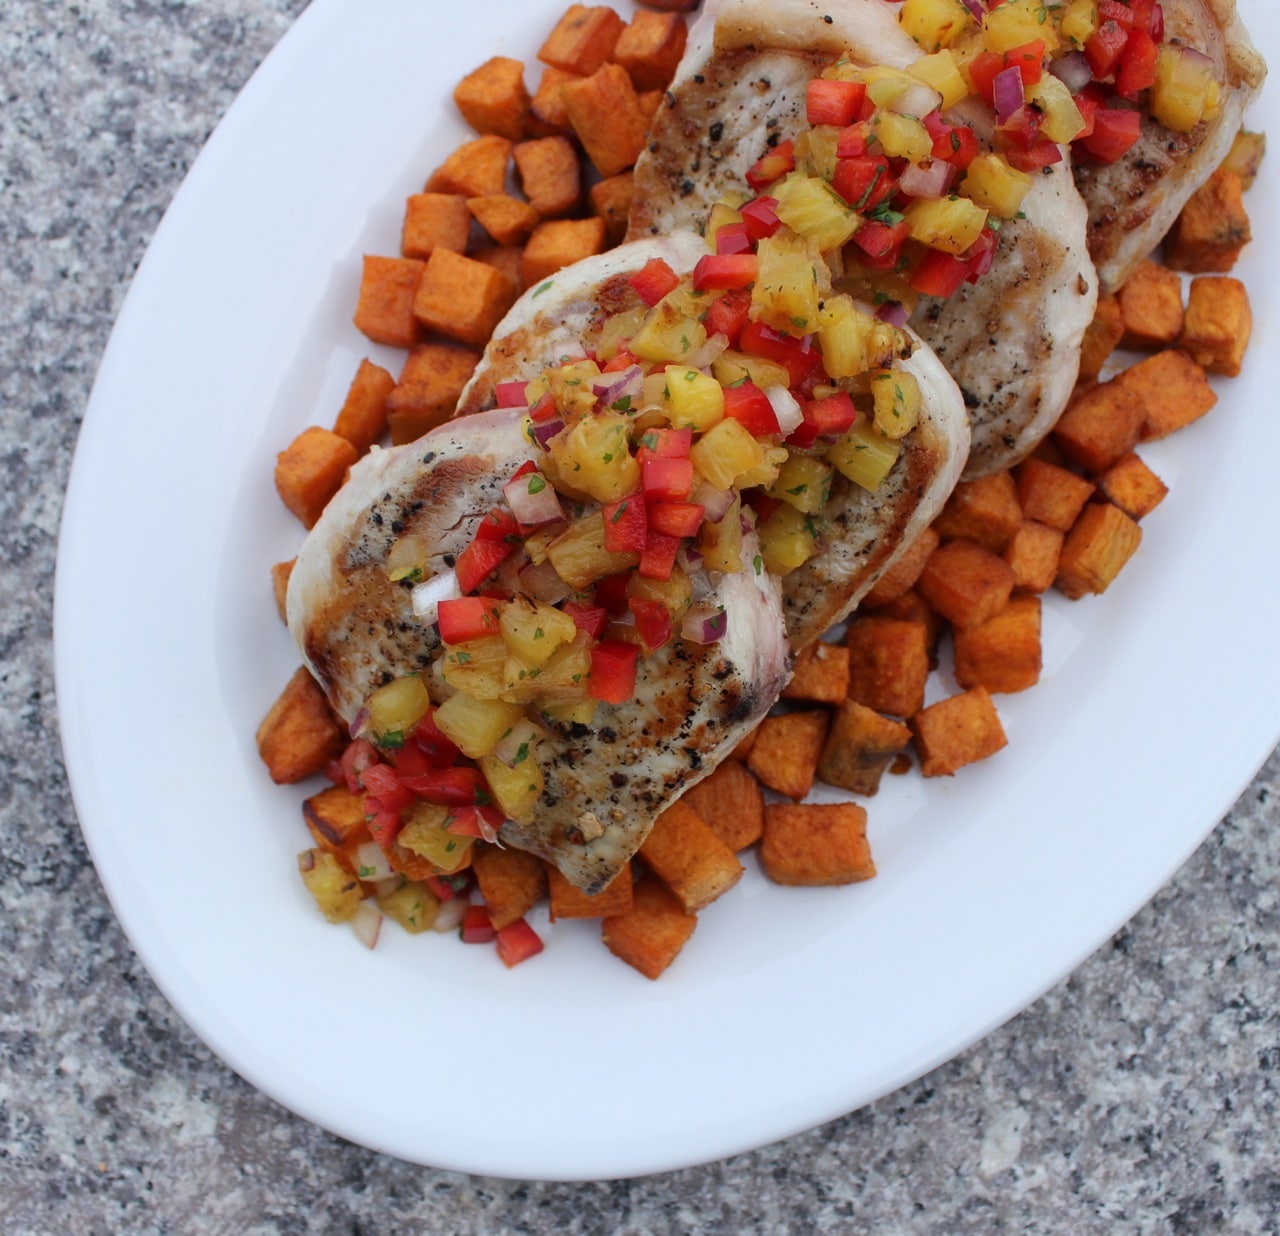 pork-chops-with-grilled-pineapple-salsa-and-spiced-sweet-potatoes-6